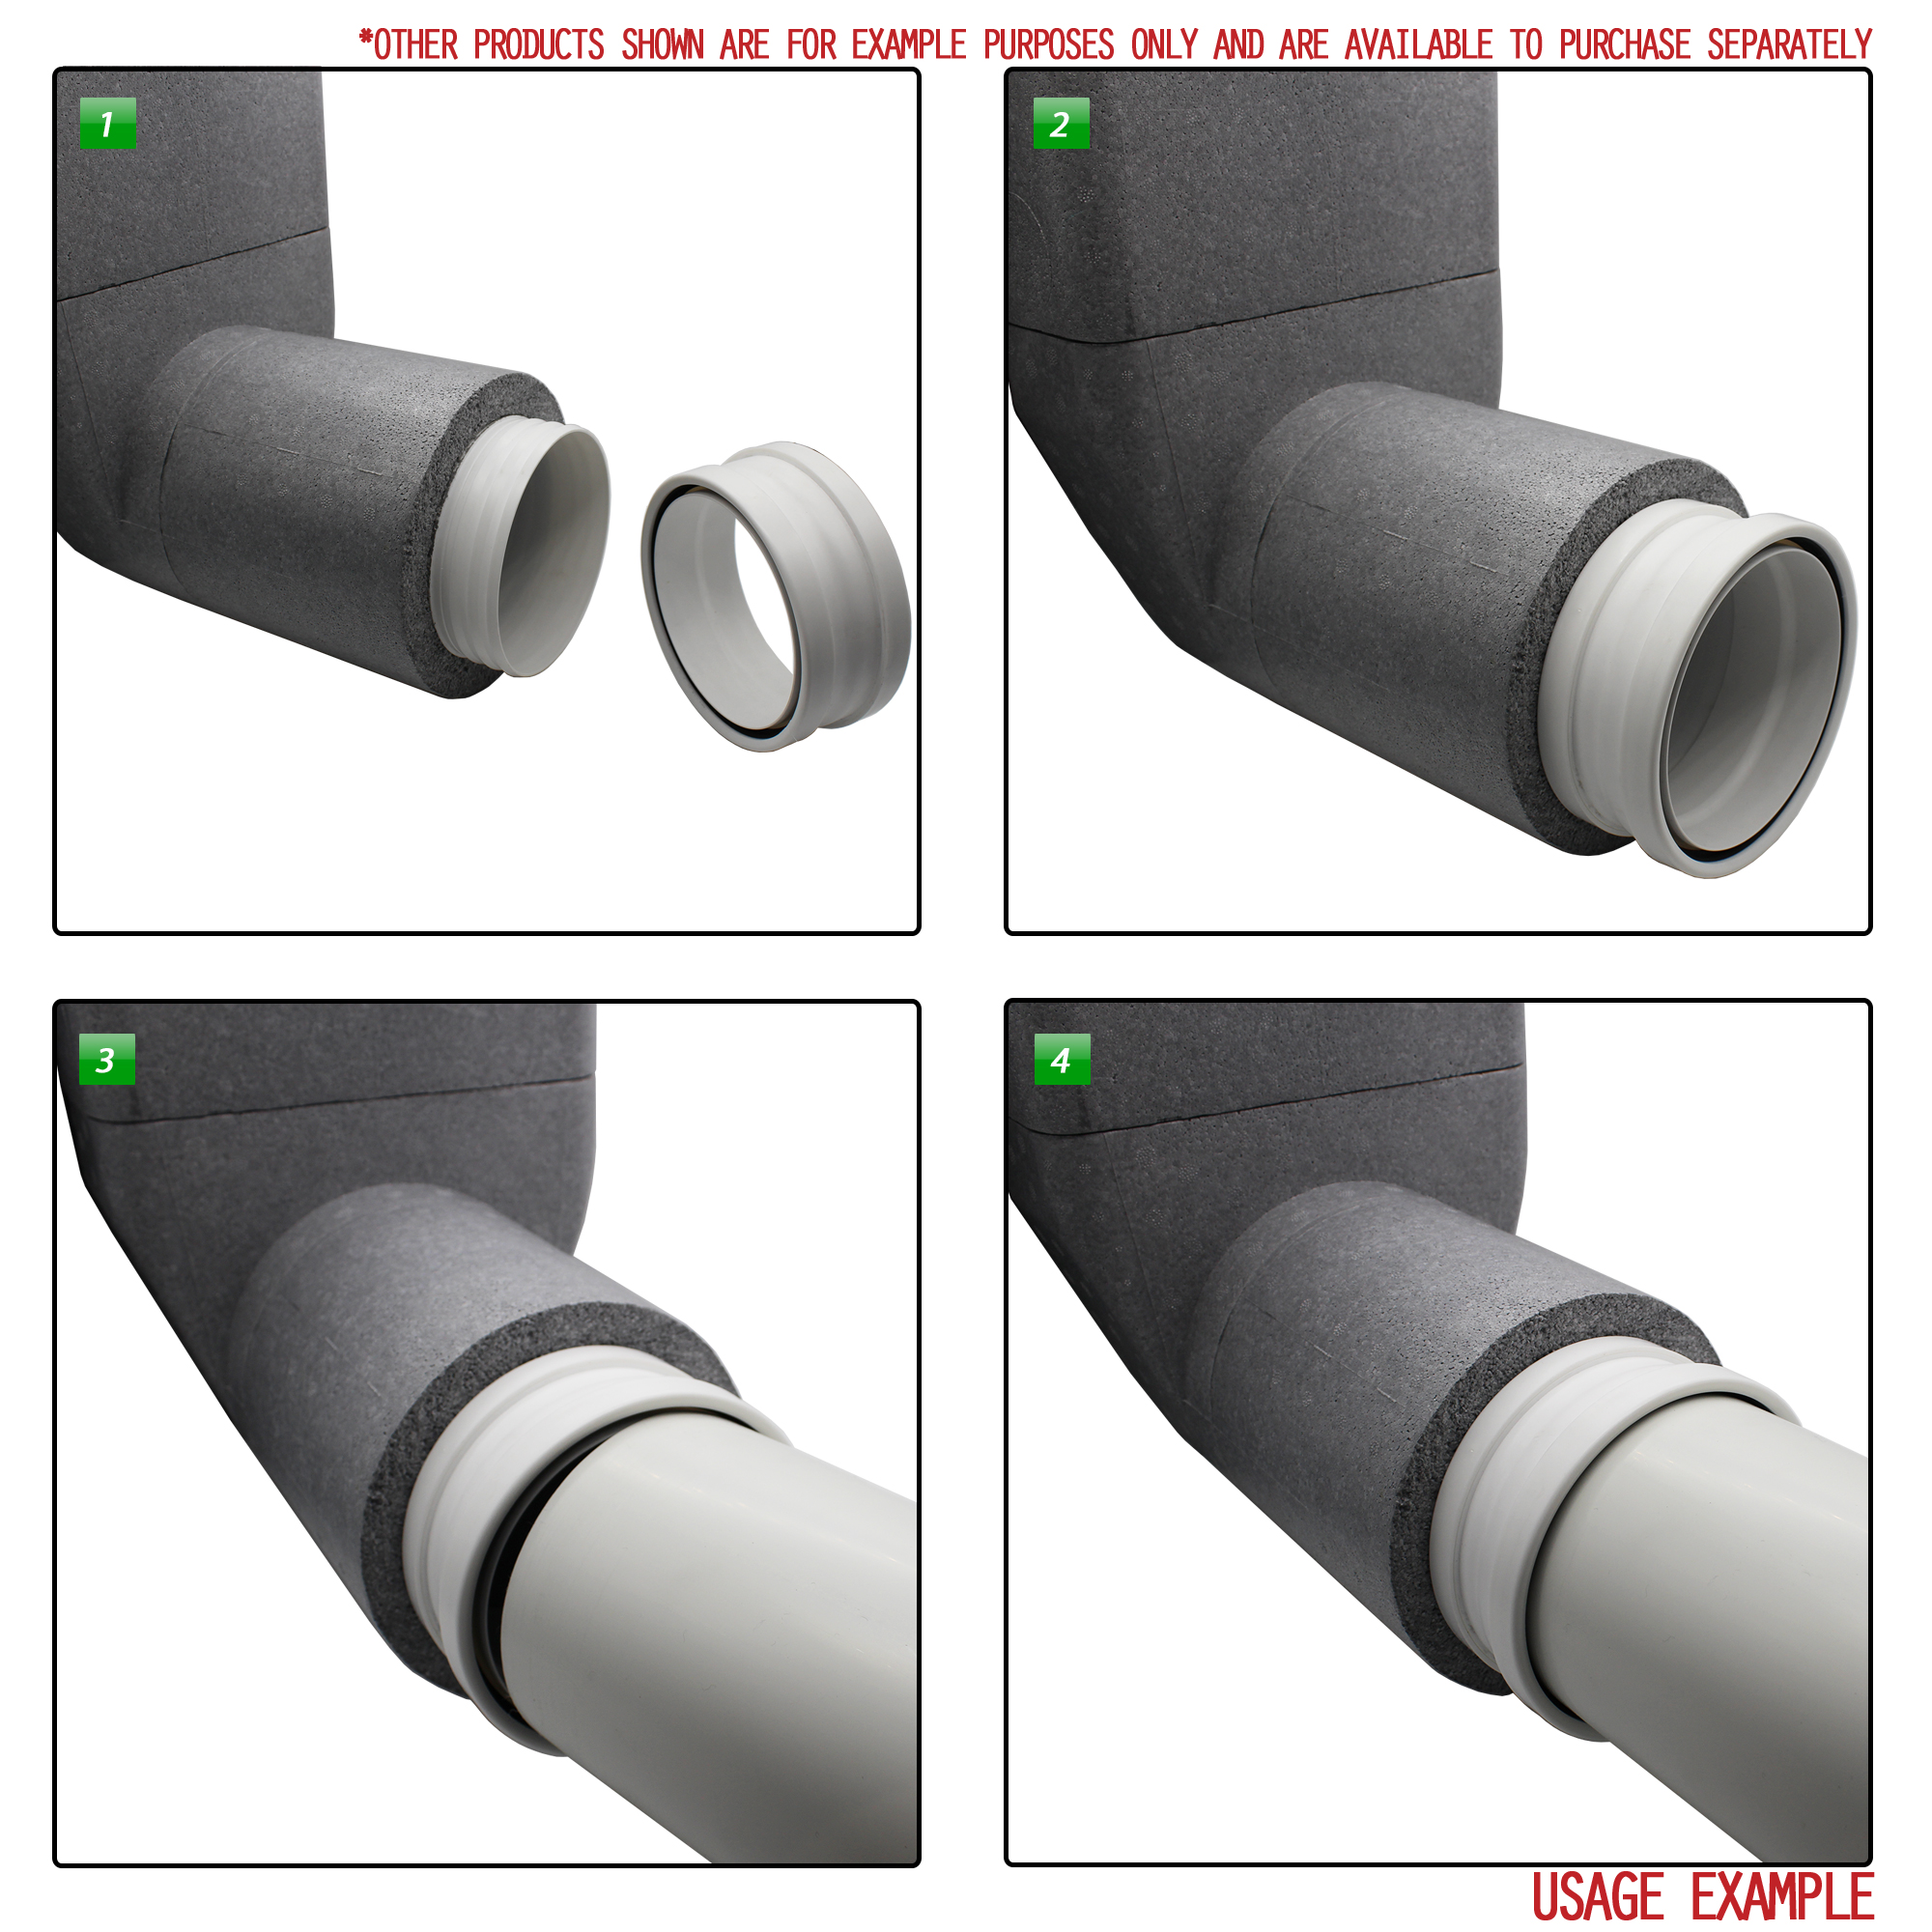 Kair Self-Seal Thermal Ducting 204X60mm To 125mm Dia Plenum Complete With Female Click And Lock Fittings